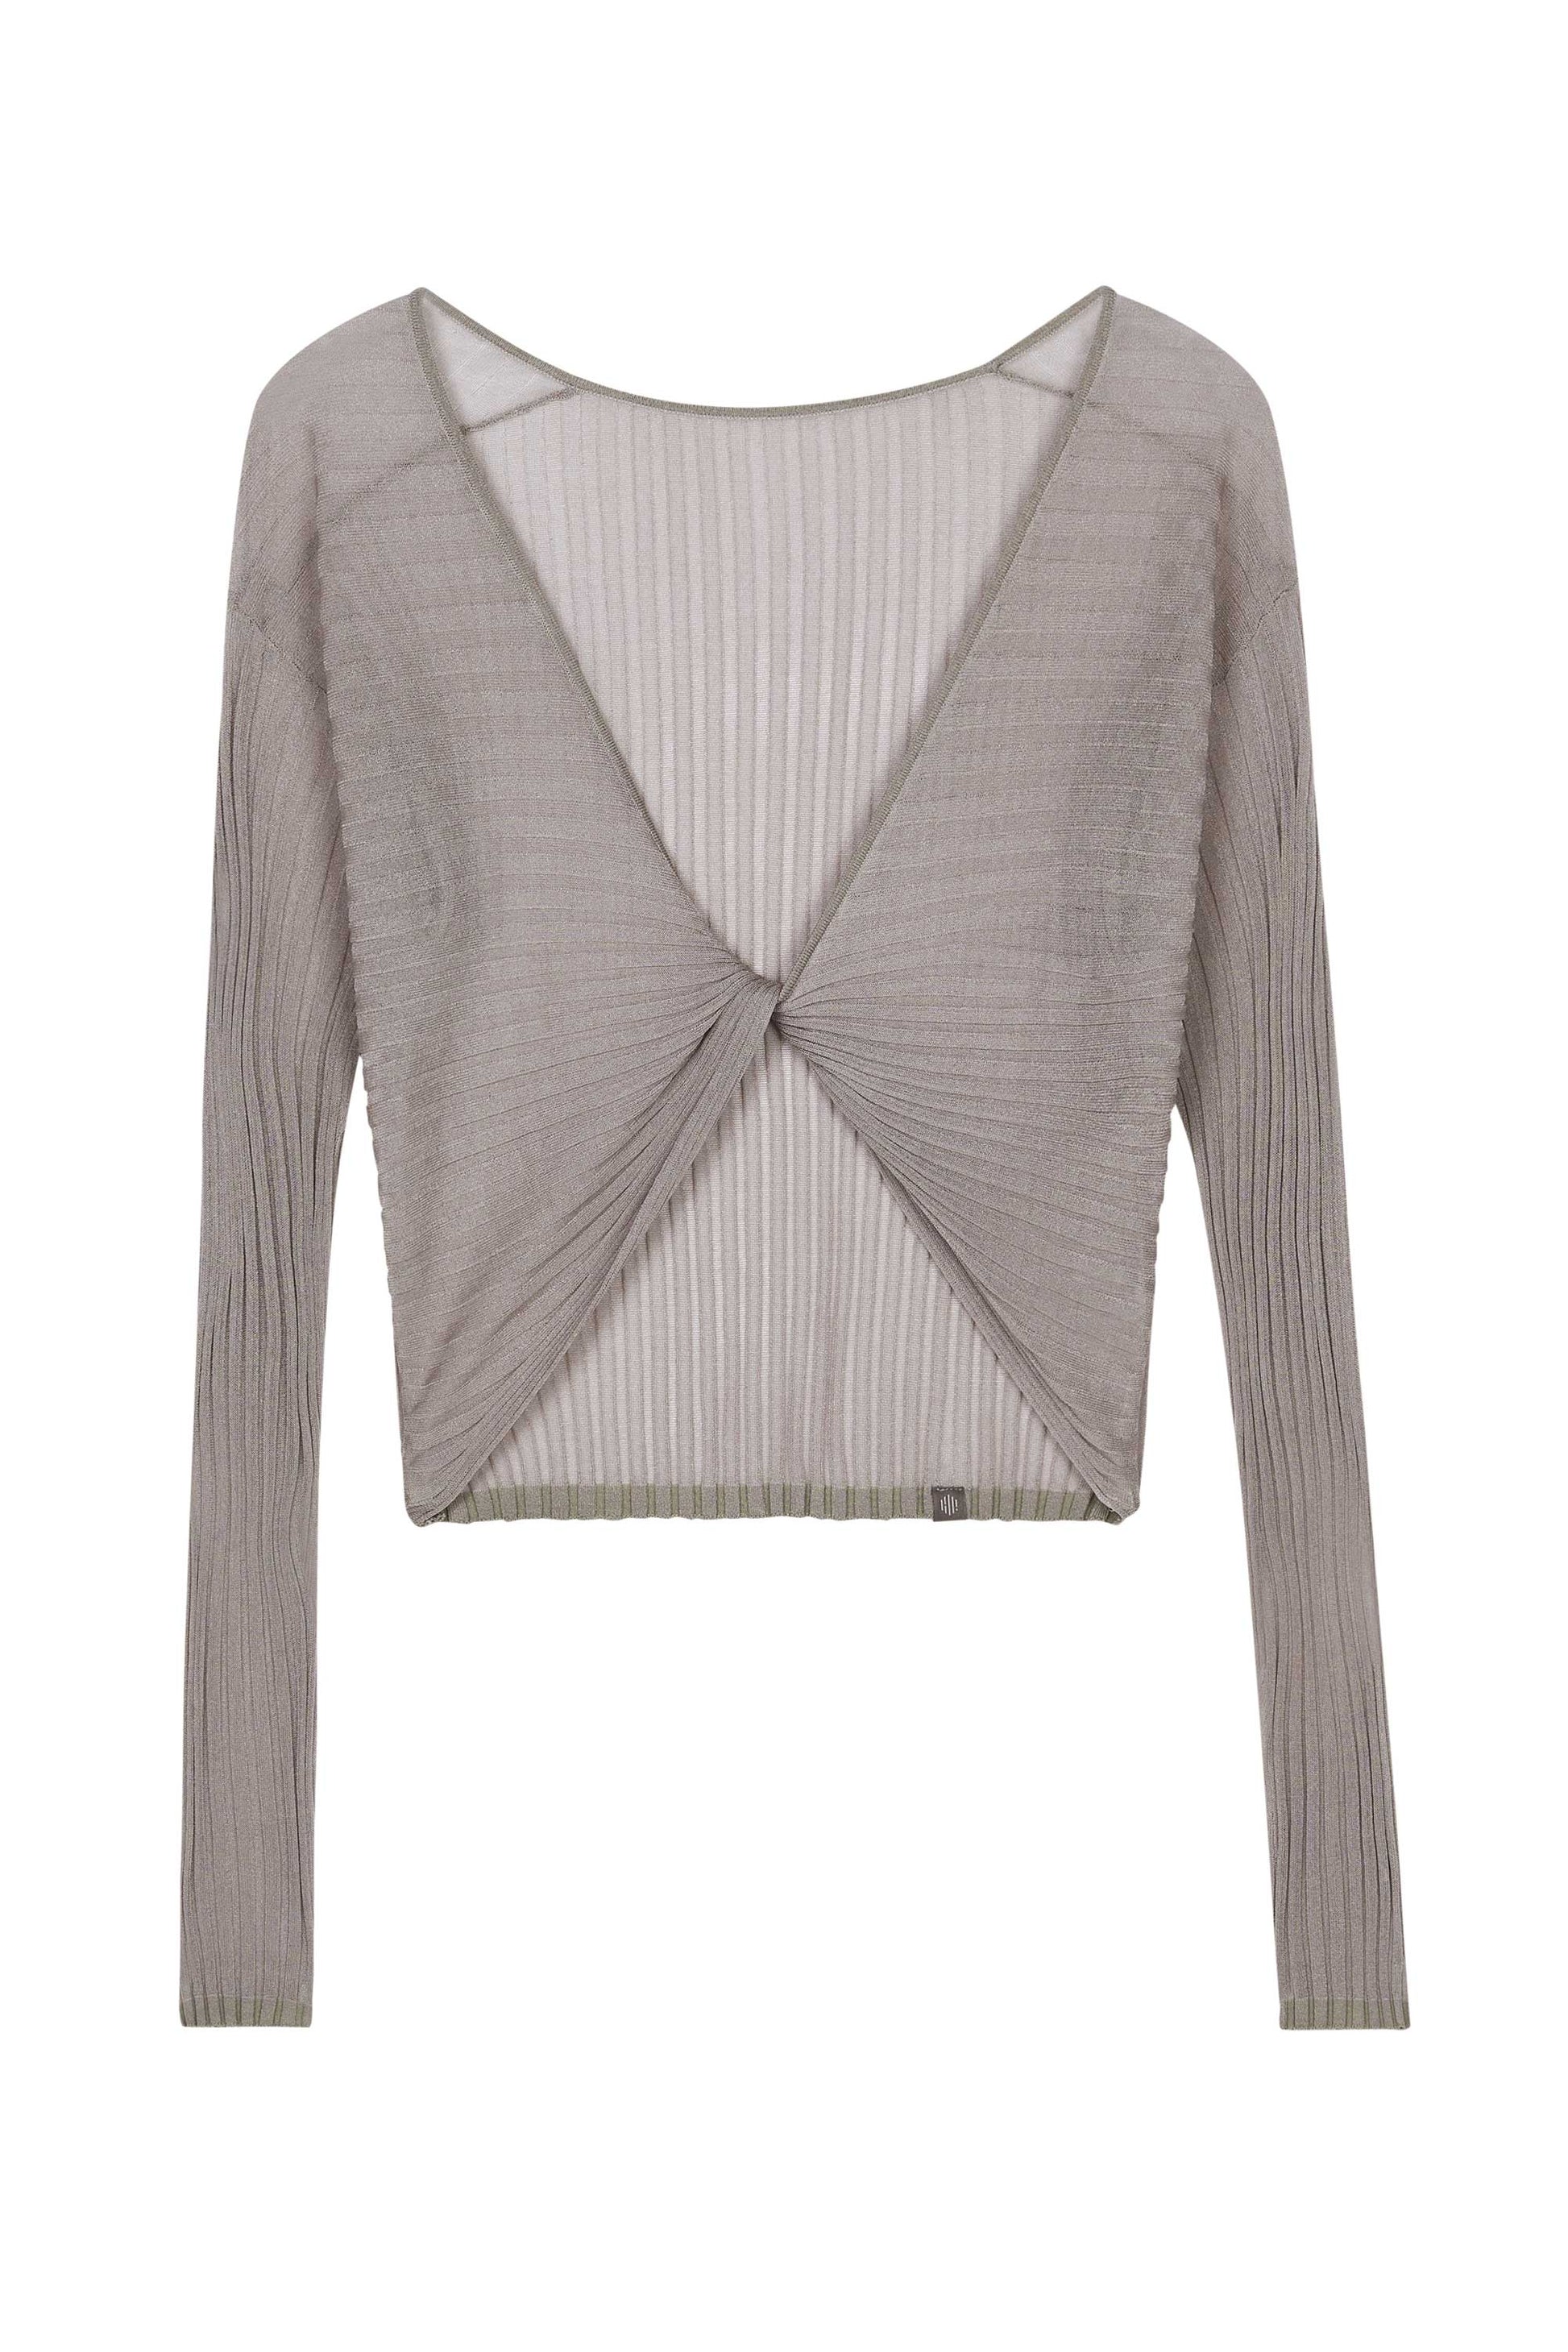 Flat Lay image of a mauve color knit top with front knot